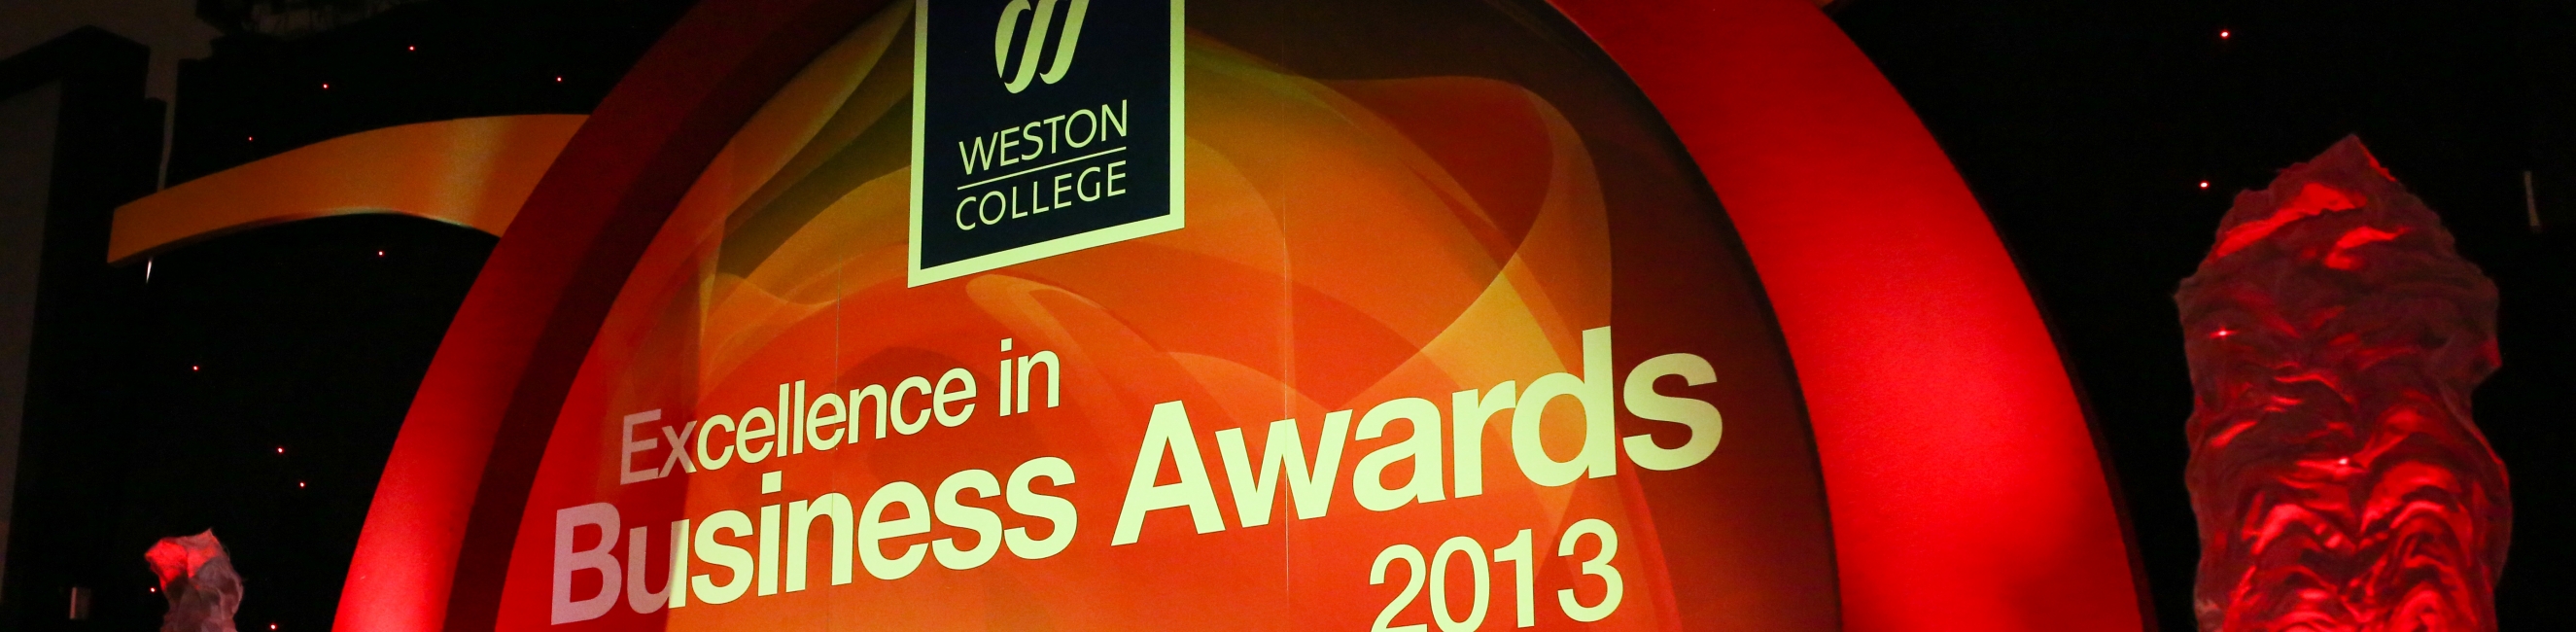 Weston College, Further Education for 16-18 year olds